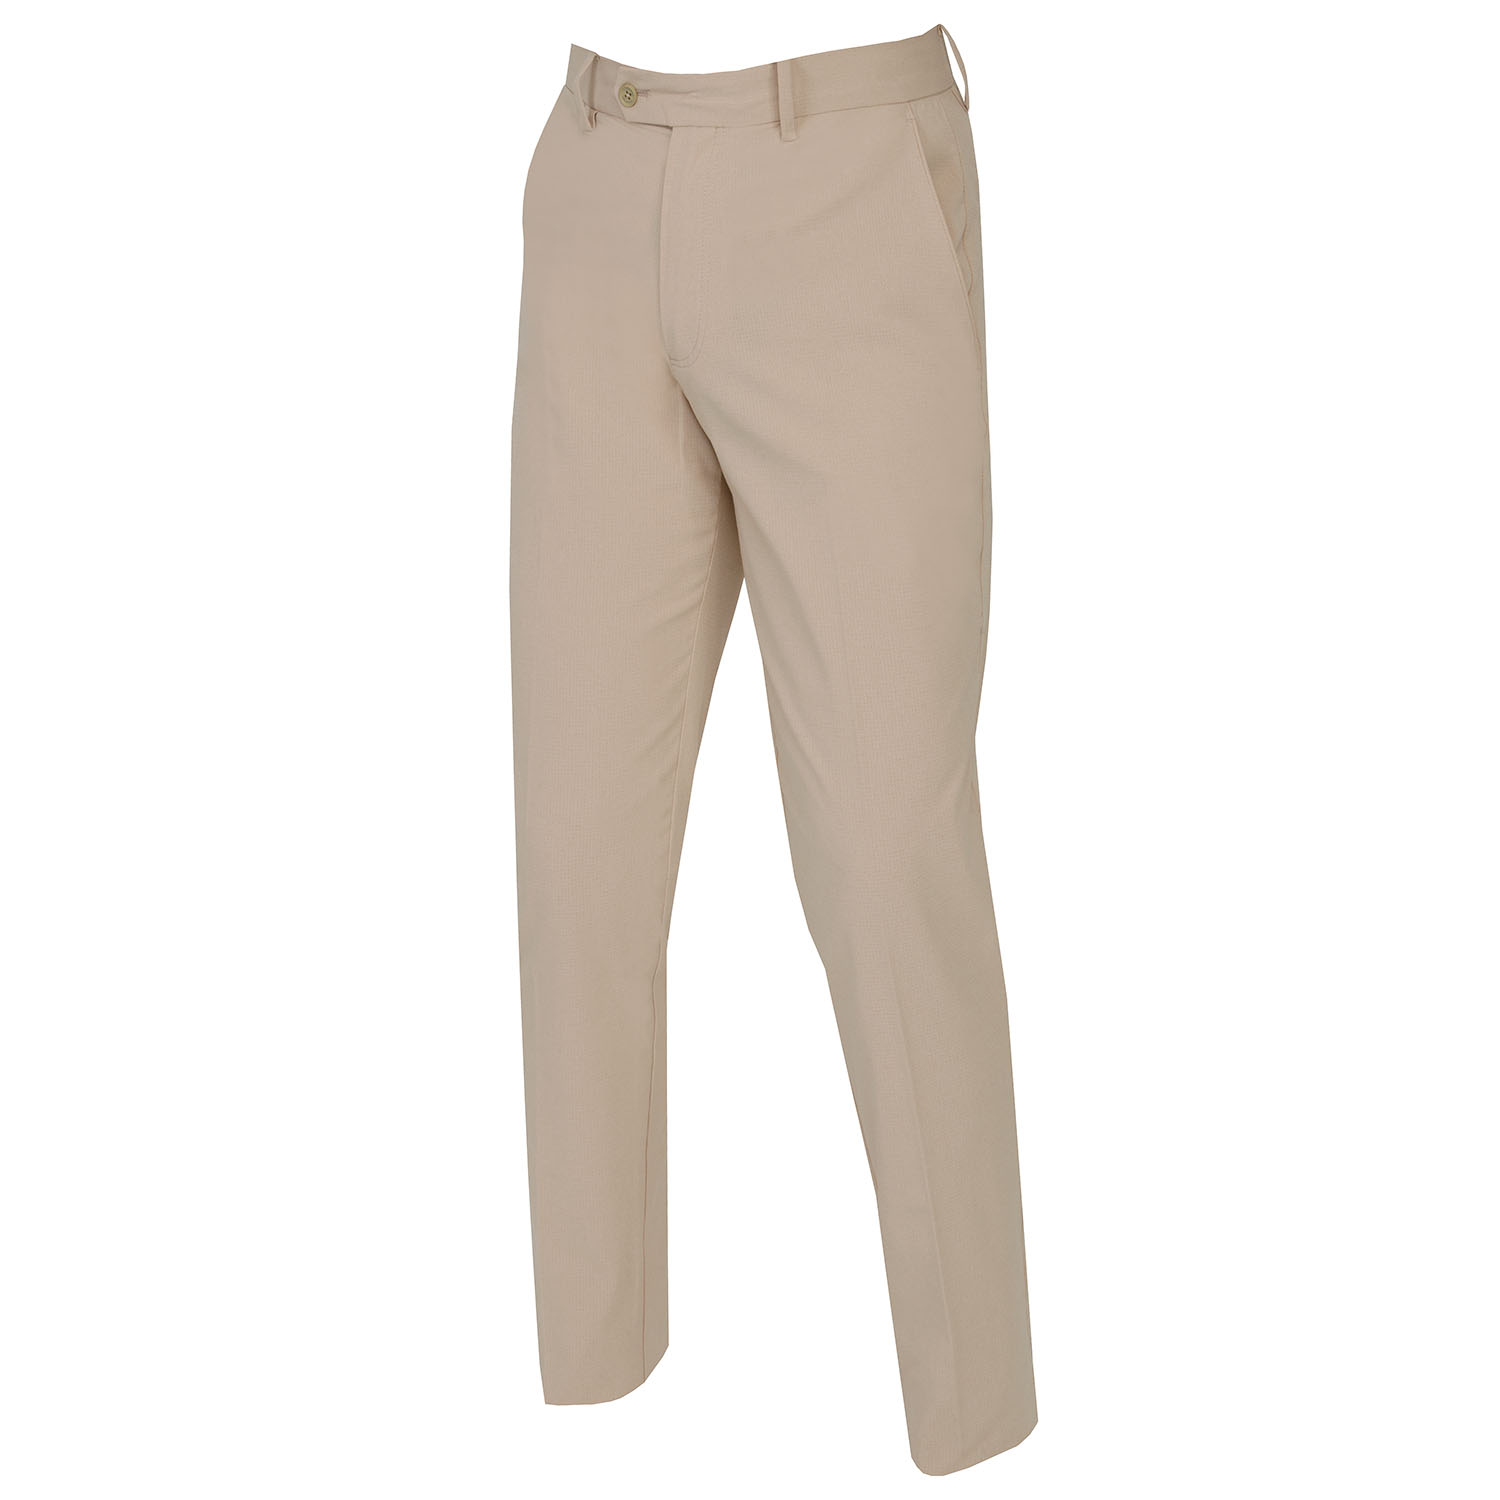 J Lindeberg Vent Trousers